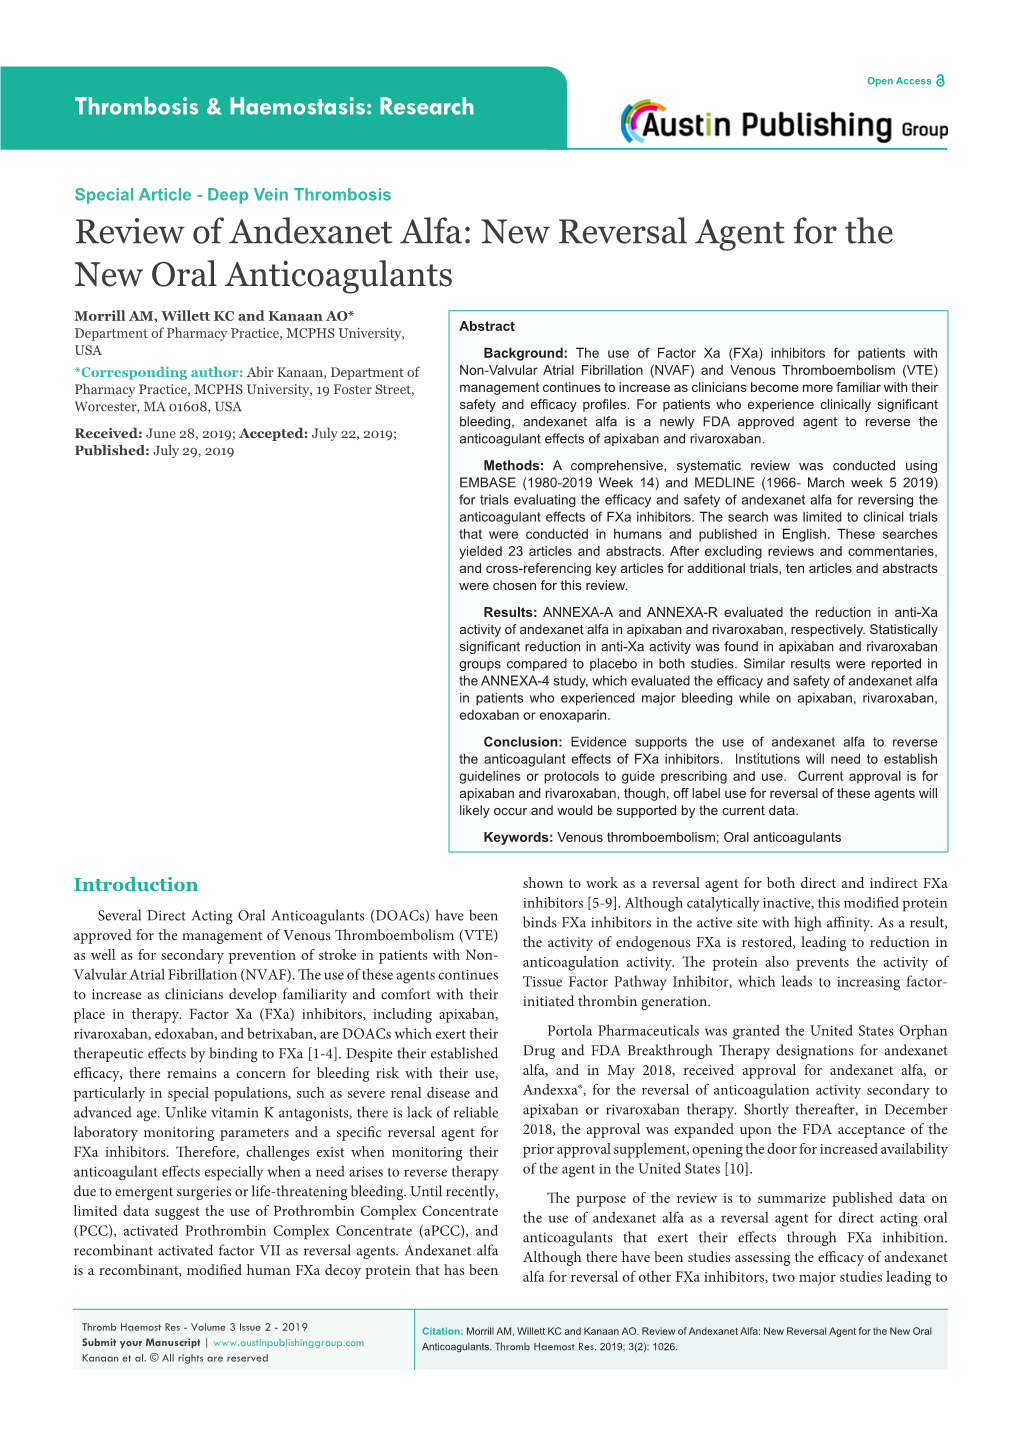 Review of Andexanet Alfa: New Reversal Agent for the New Oral Anticoagulants